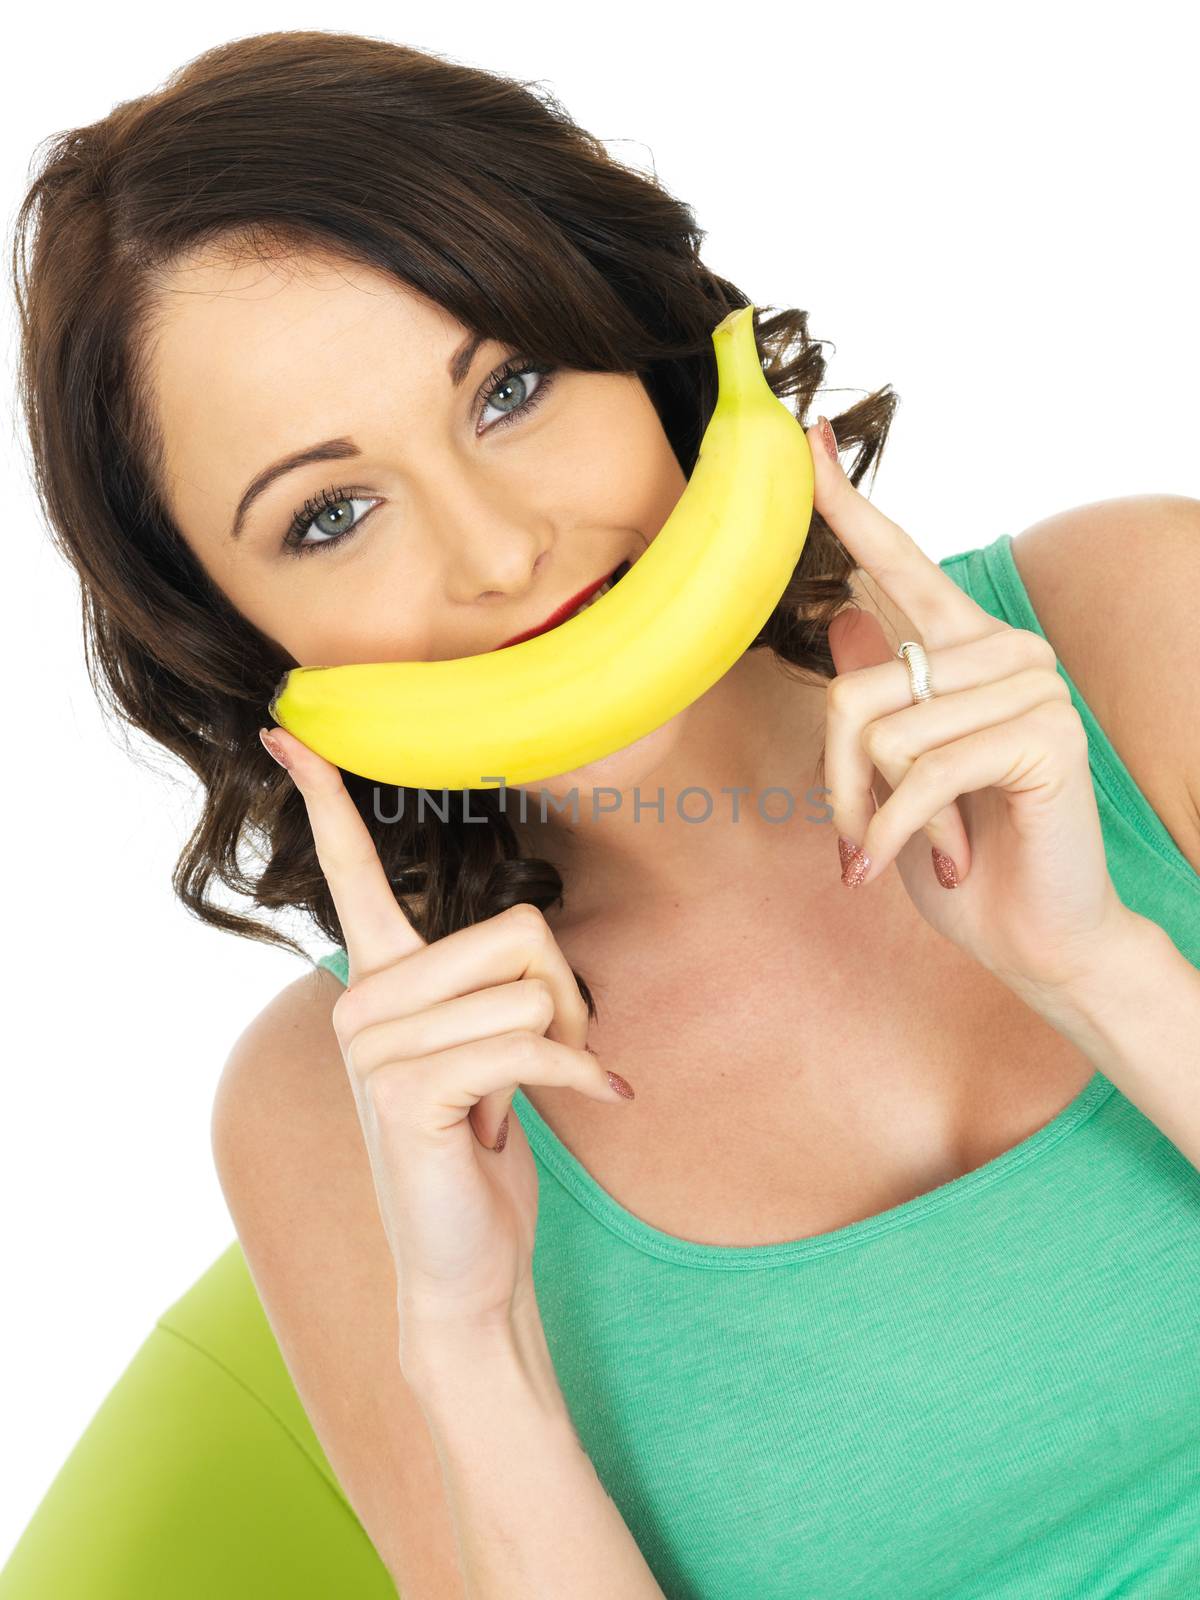 Young Woman Holding a Banana by Whiteboxmedia